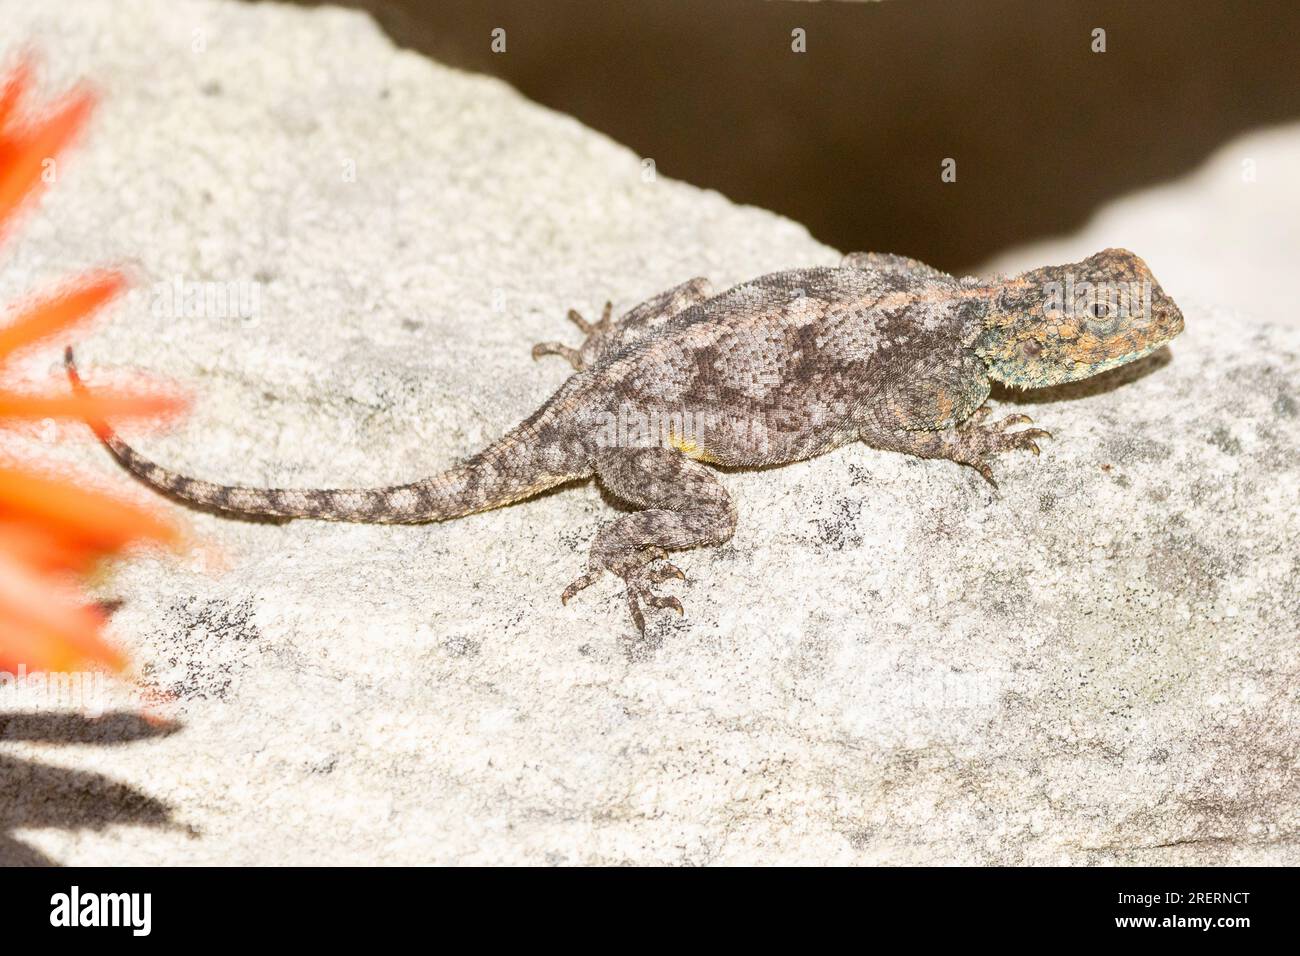 African Rock Agama o Southern Rock Agama (Agama atra), Rooi Els, Rooiels, Rooi-Els, Western Cape South Africa Foto Stock